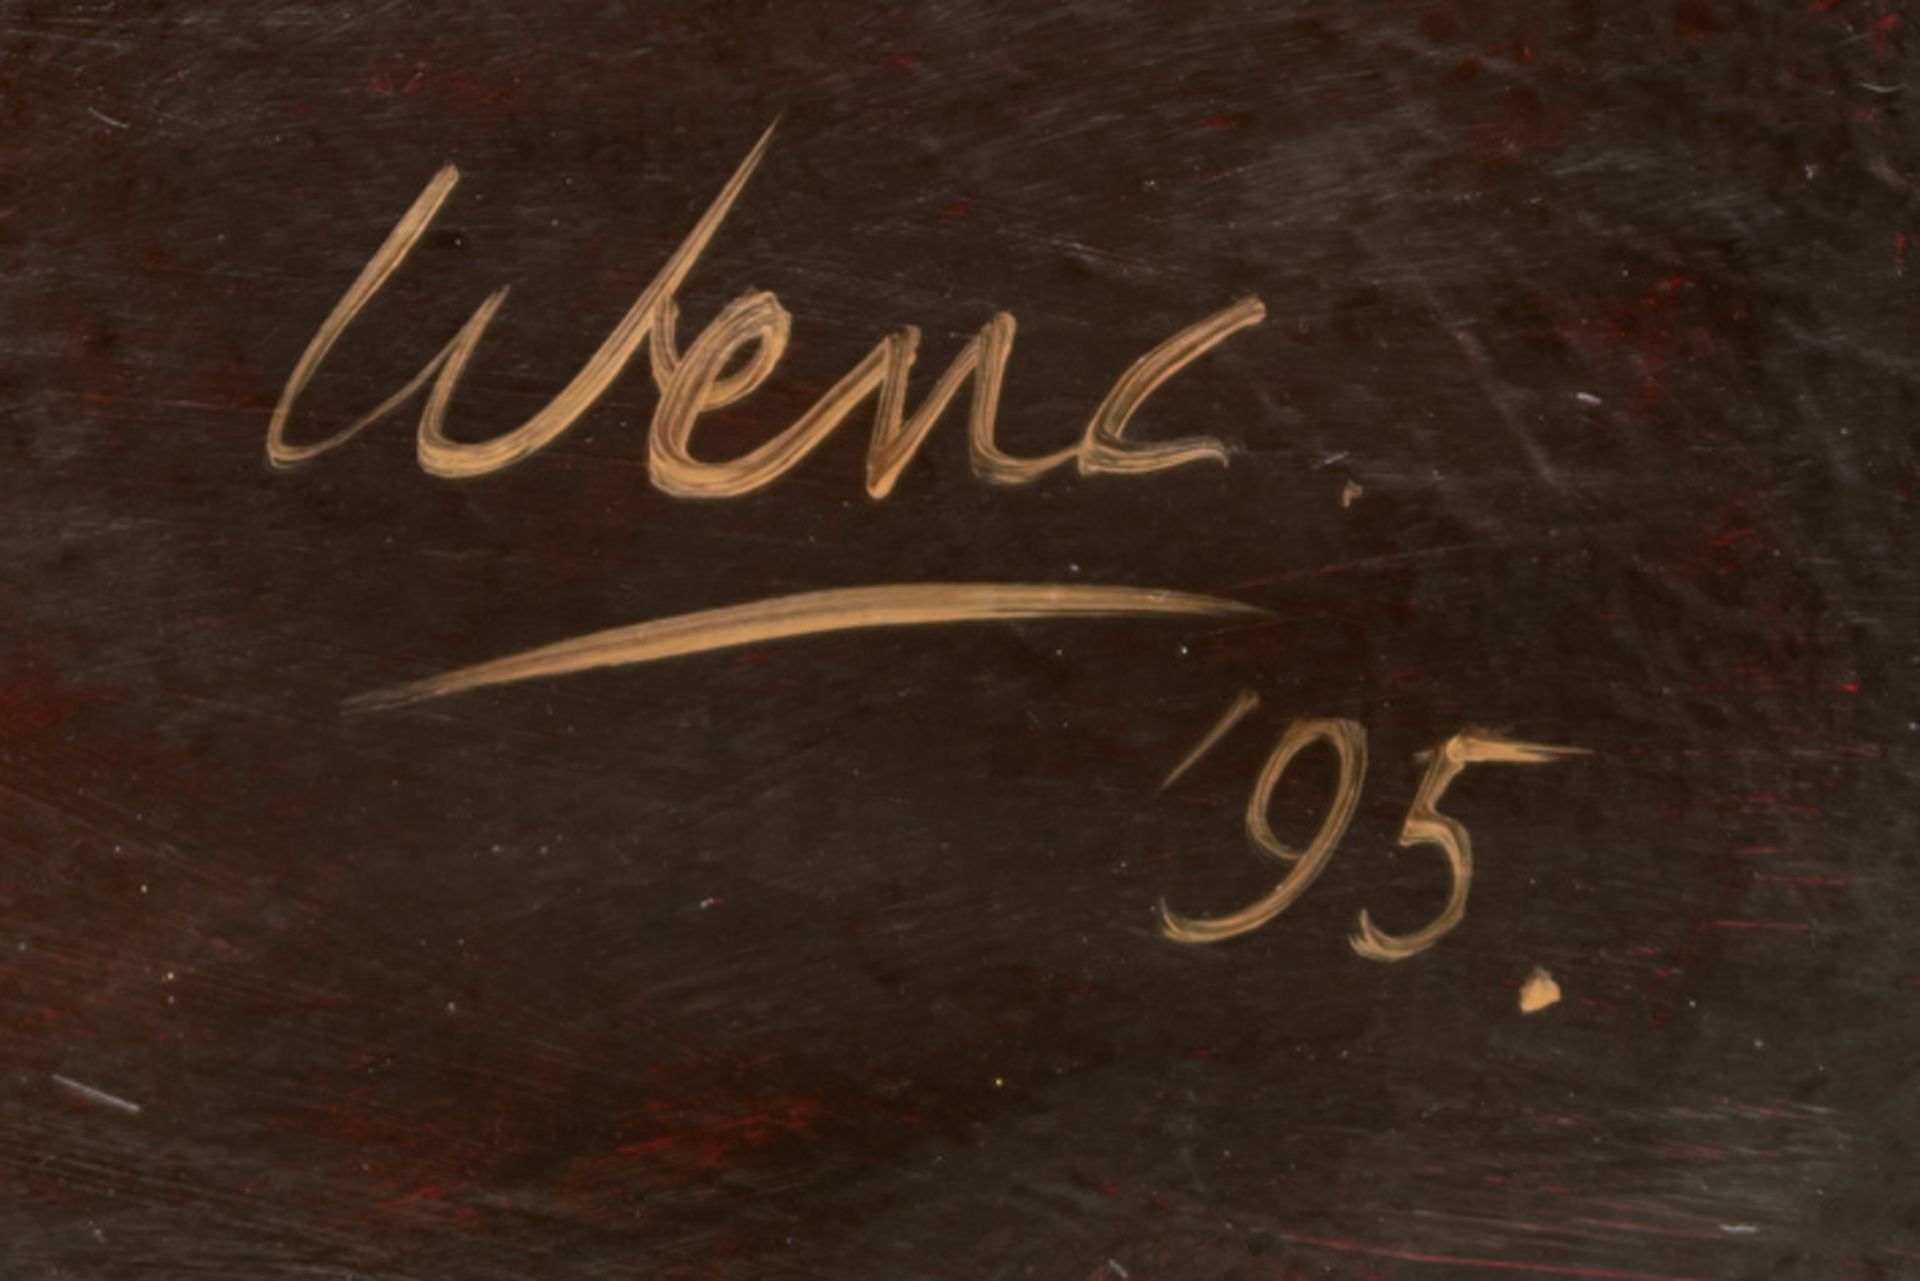 20th Cent. Belgian oil on panel - signed Wenceslas Quataert and dated 1995 on the back || QUATAERT - Image 2 of 5